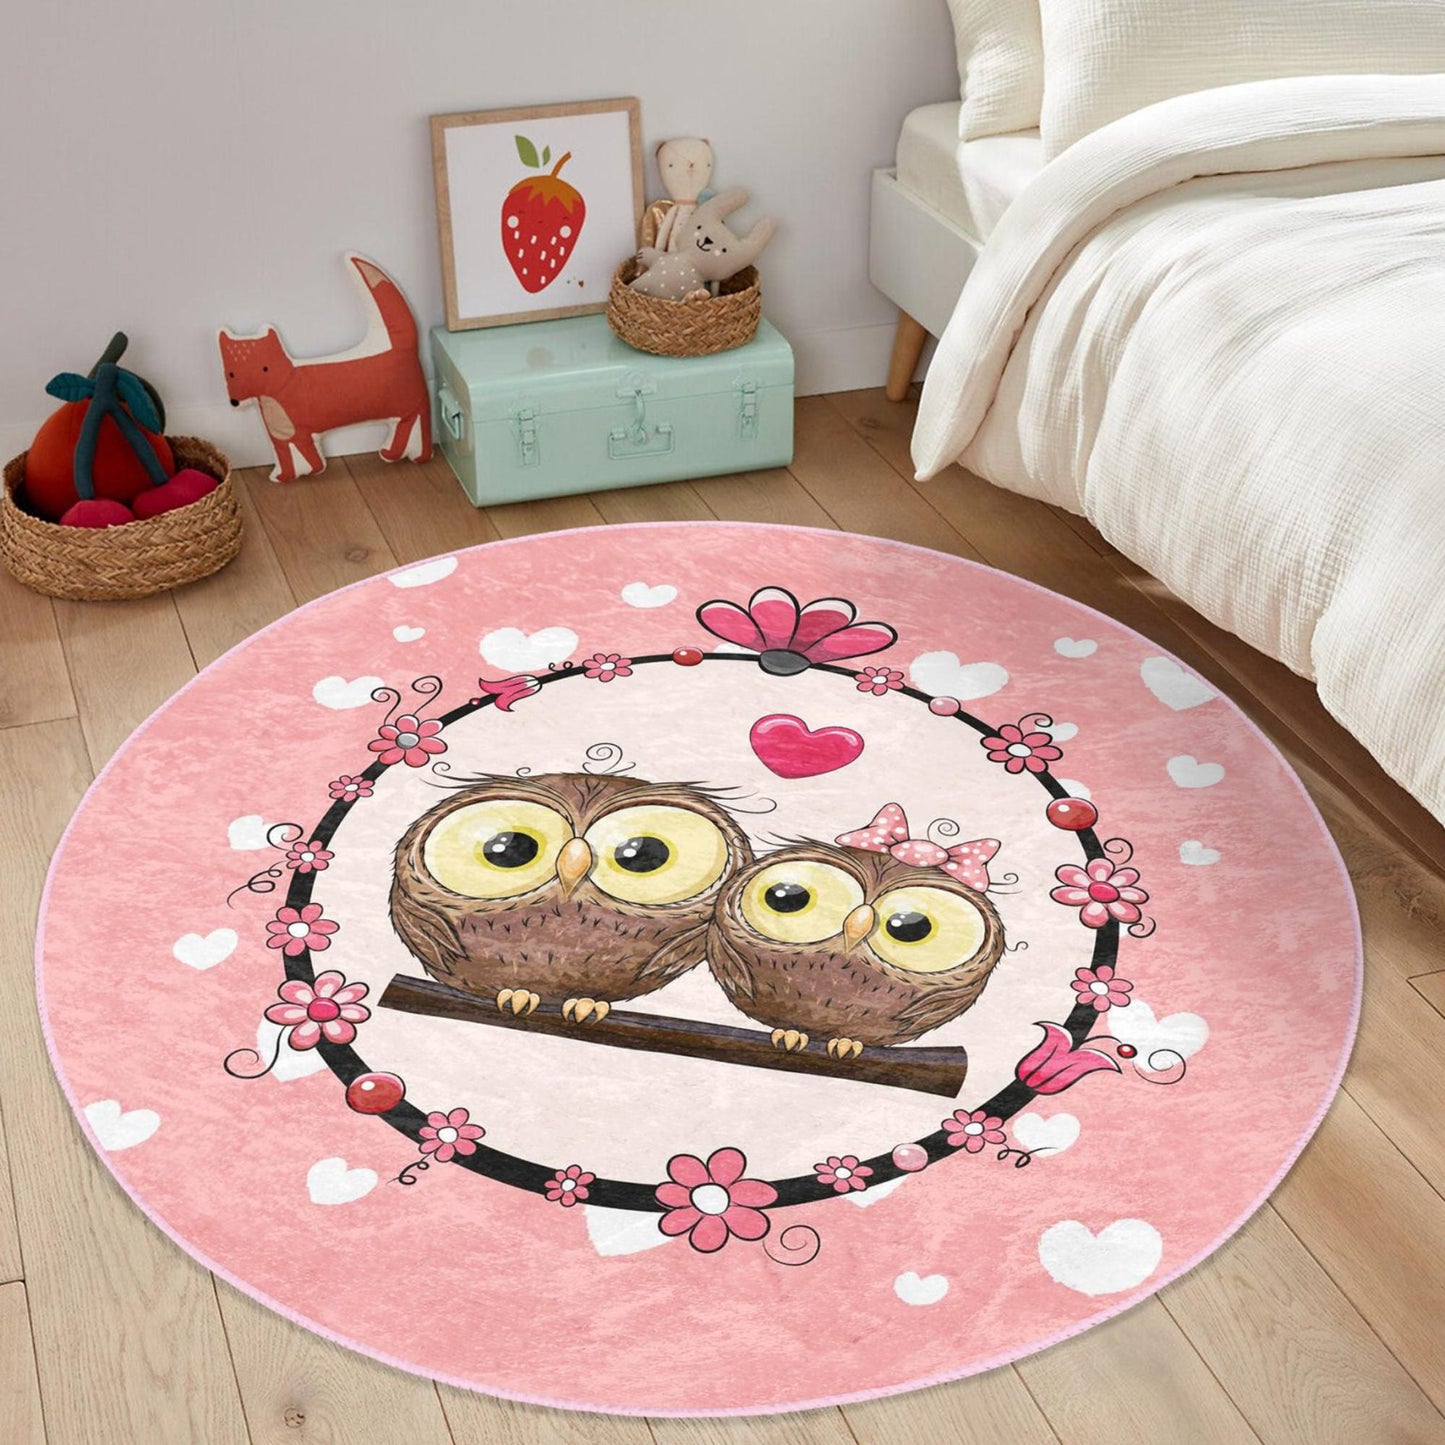 Soft and cozy rug adorned with cute pink owl loves motif for children's rooms.